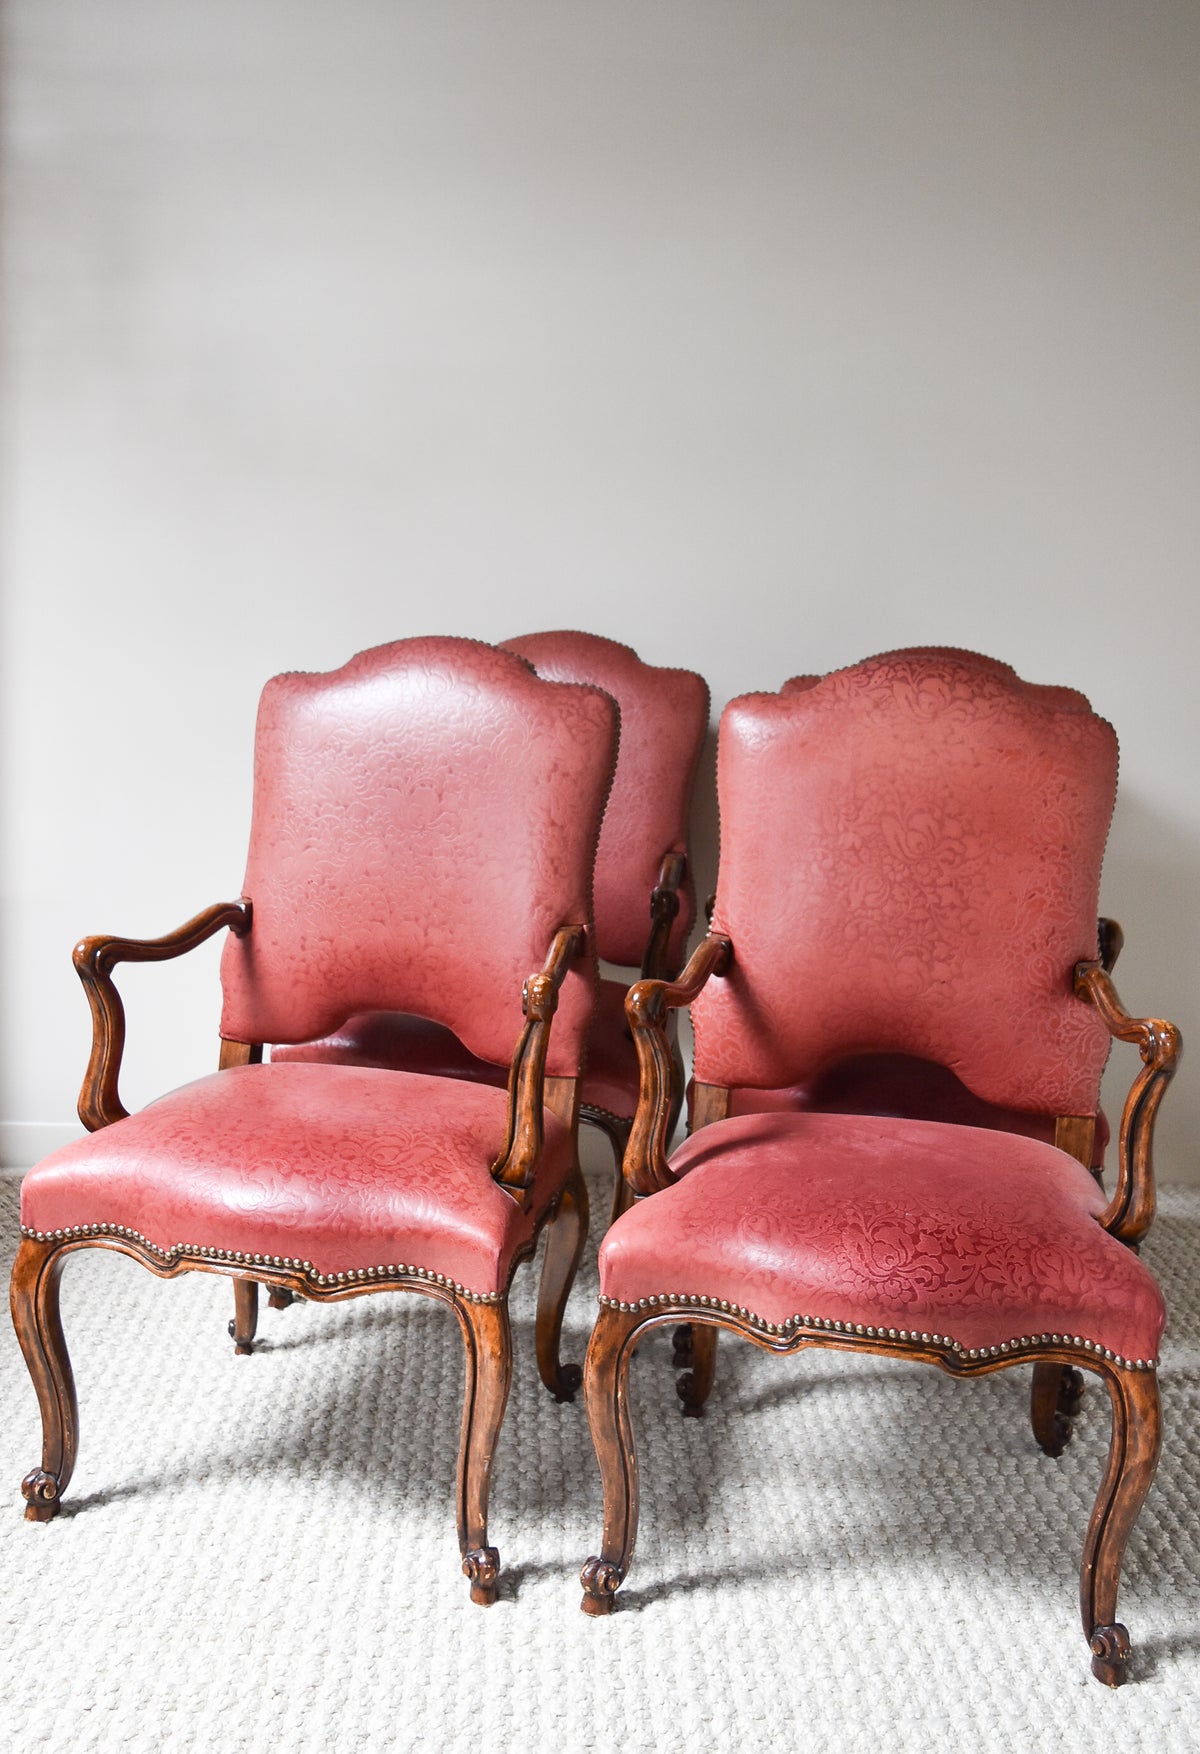 Set of 4 Red Leather Chairs